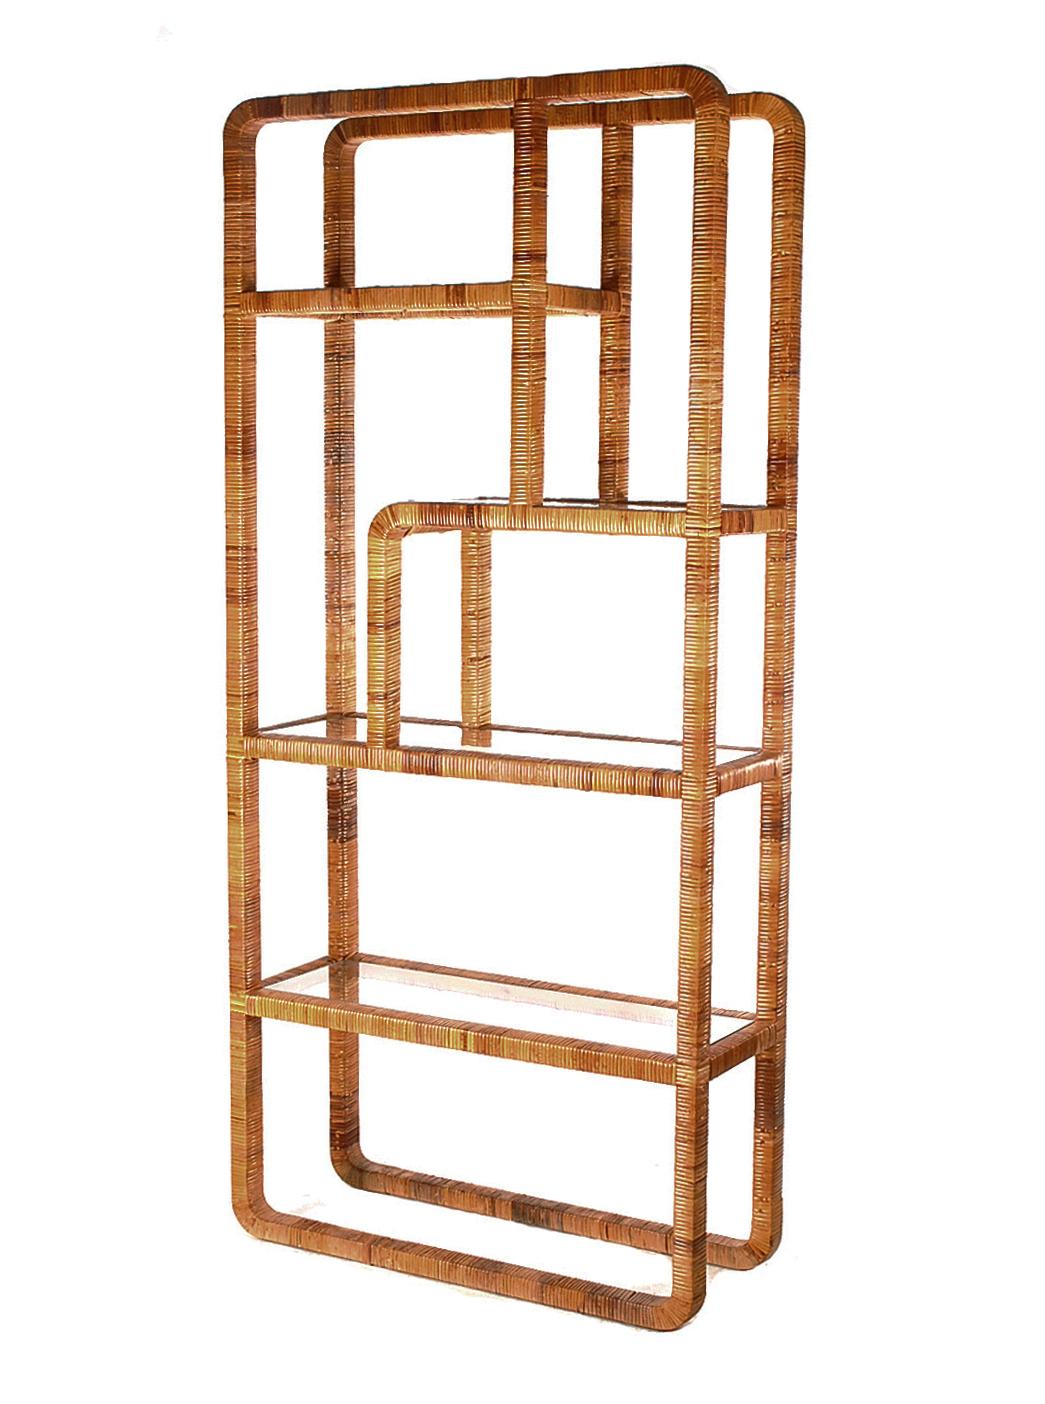 A 1970's retro classic etagere. It consists of rattan wrapped wood framing with clear glass shelves. Overall in excellent condition.